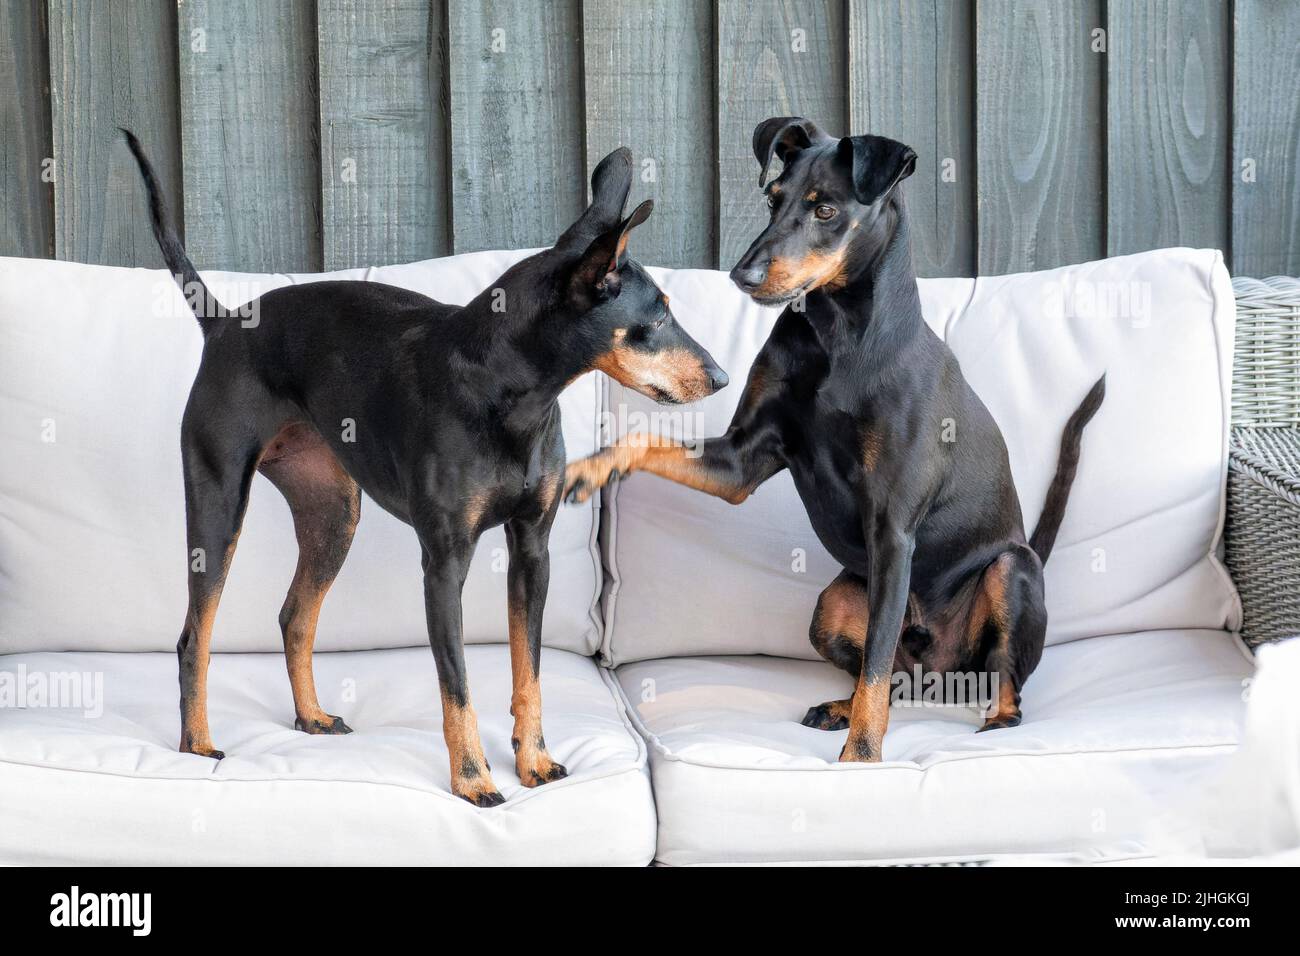 Two playful Manchester Terrier pet dogs playing on a garden seat. The dogs are brother and sister. One has his paw on the other pushing them away Stock Photo